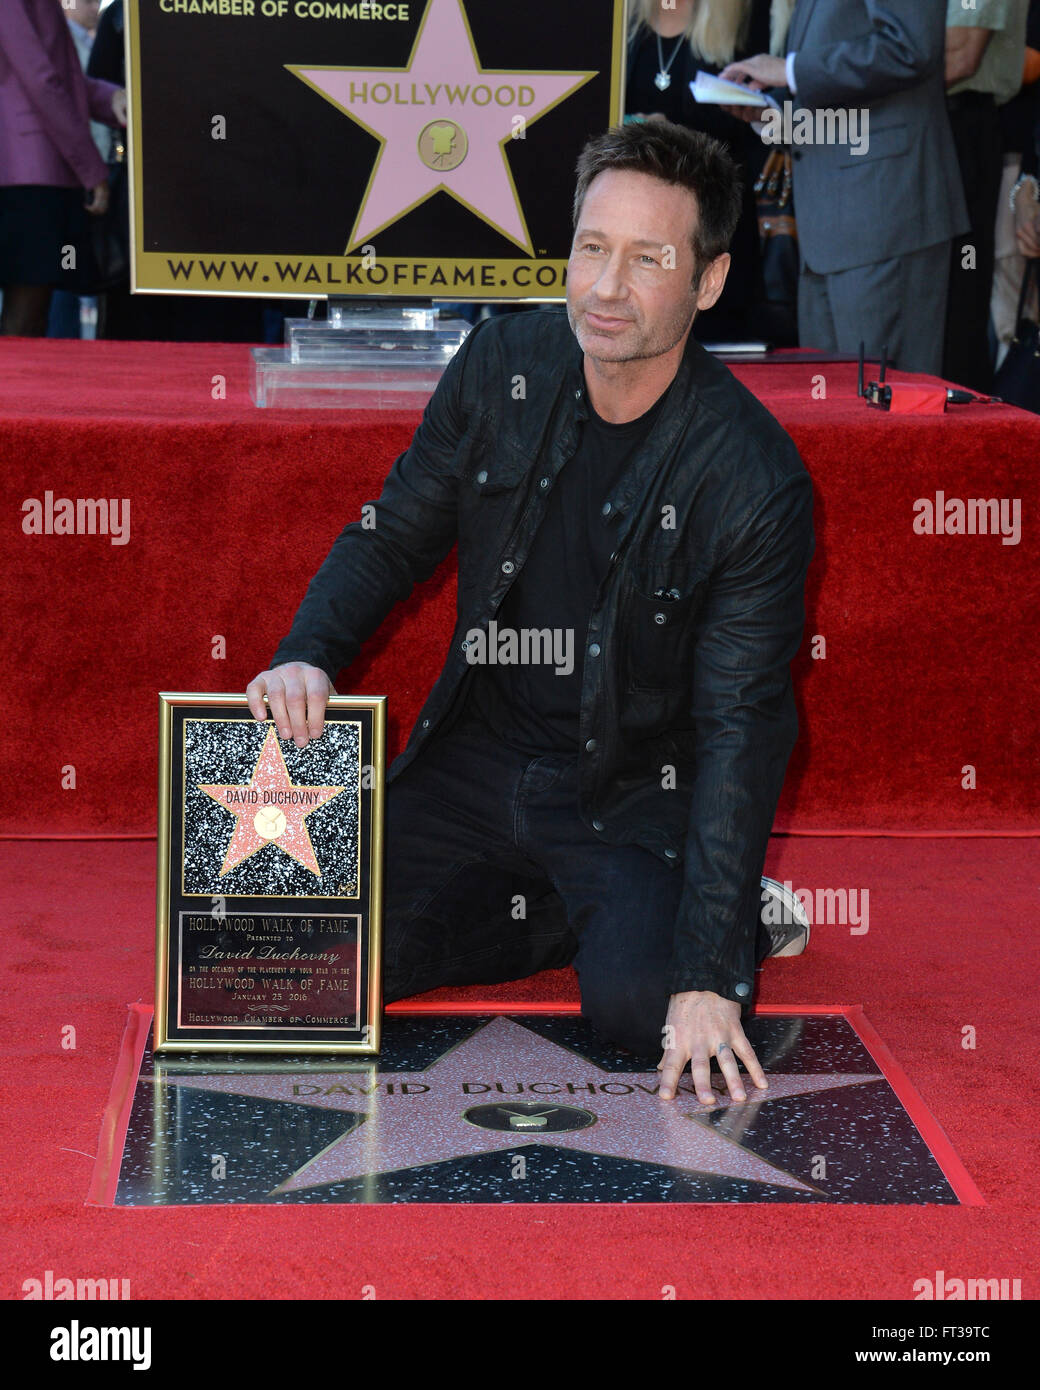 LOS ANGELES, CA - JANUARY 25, 2016: Actor David Duchovny on Hollywood Boulevard where he was honored with the 2,572nd star on the Hollywood Walk of Fame. Stock Photo